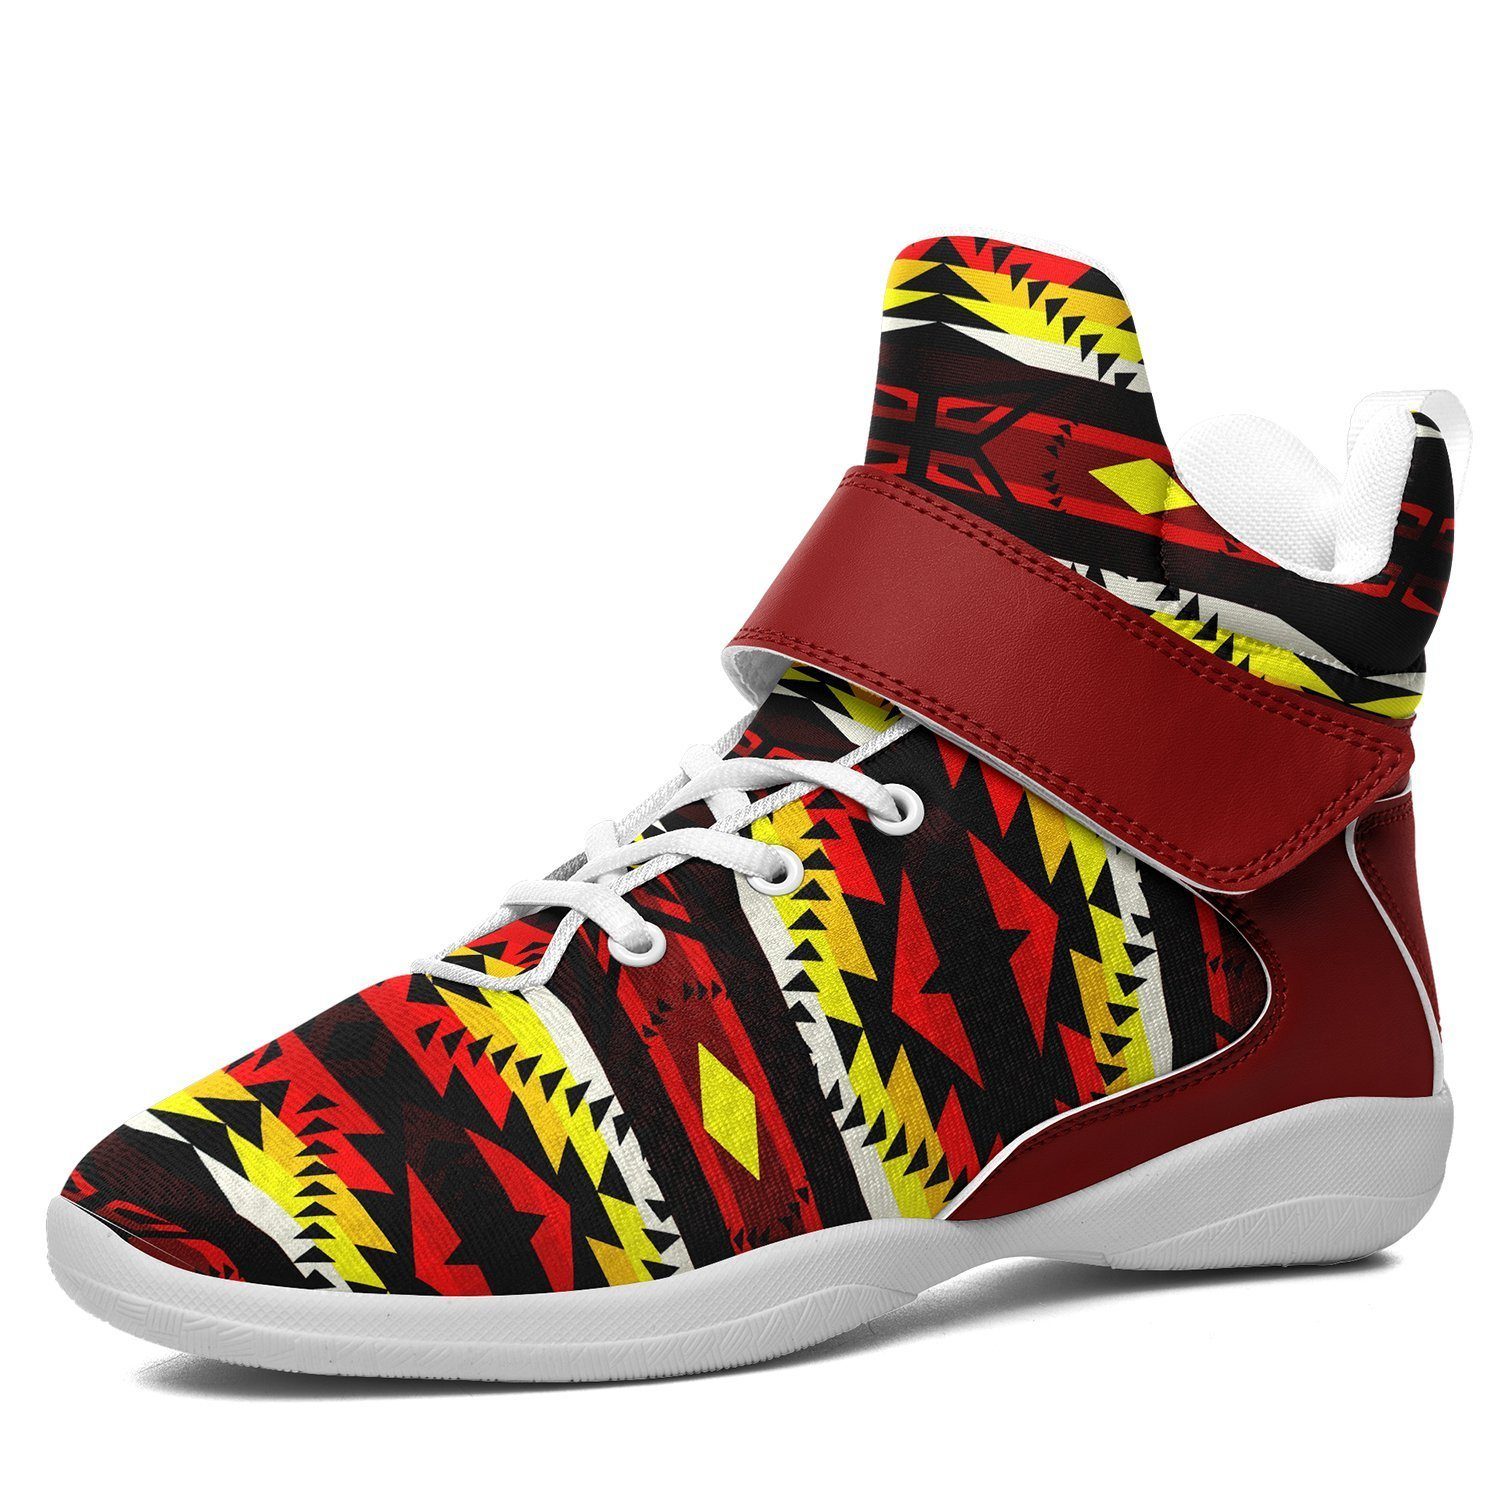 Canyon War Party Ipottaa Basketball / Sport High Top Shoes - White Sole 49 Dzine US Men 7 / EUR 40 White Sole with Dark Red Strap 